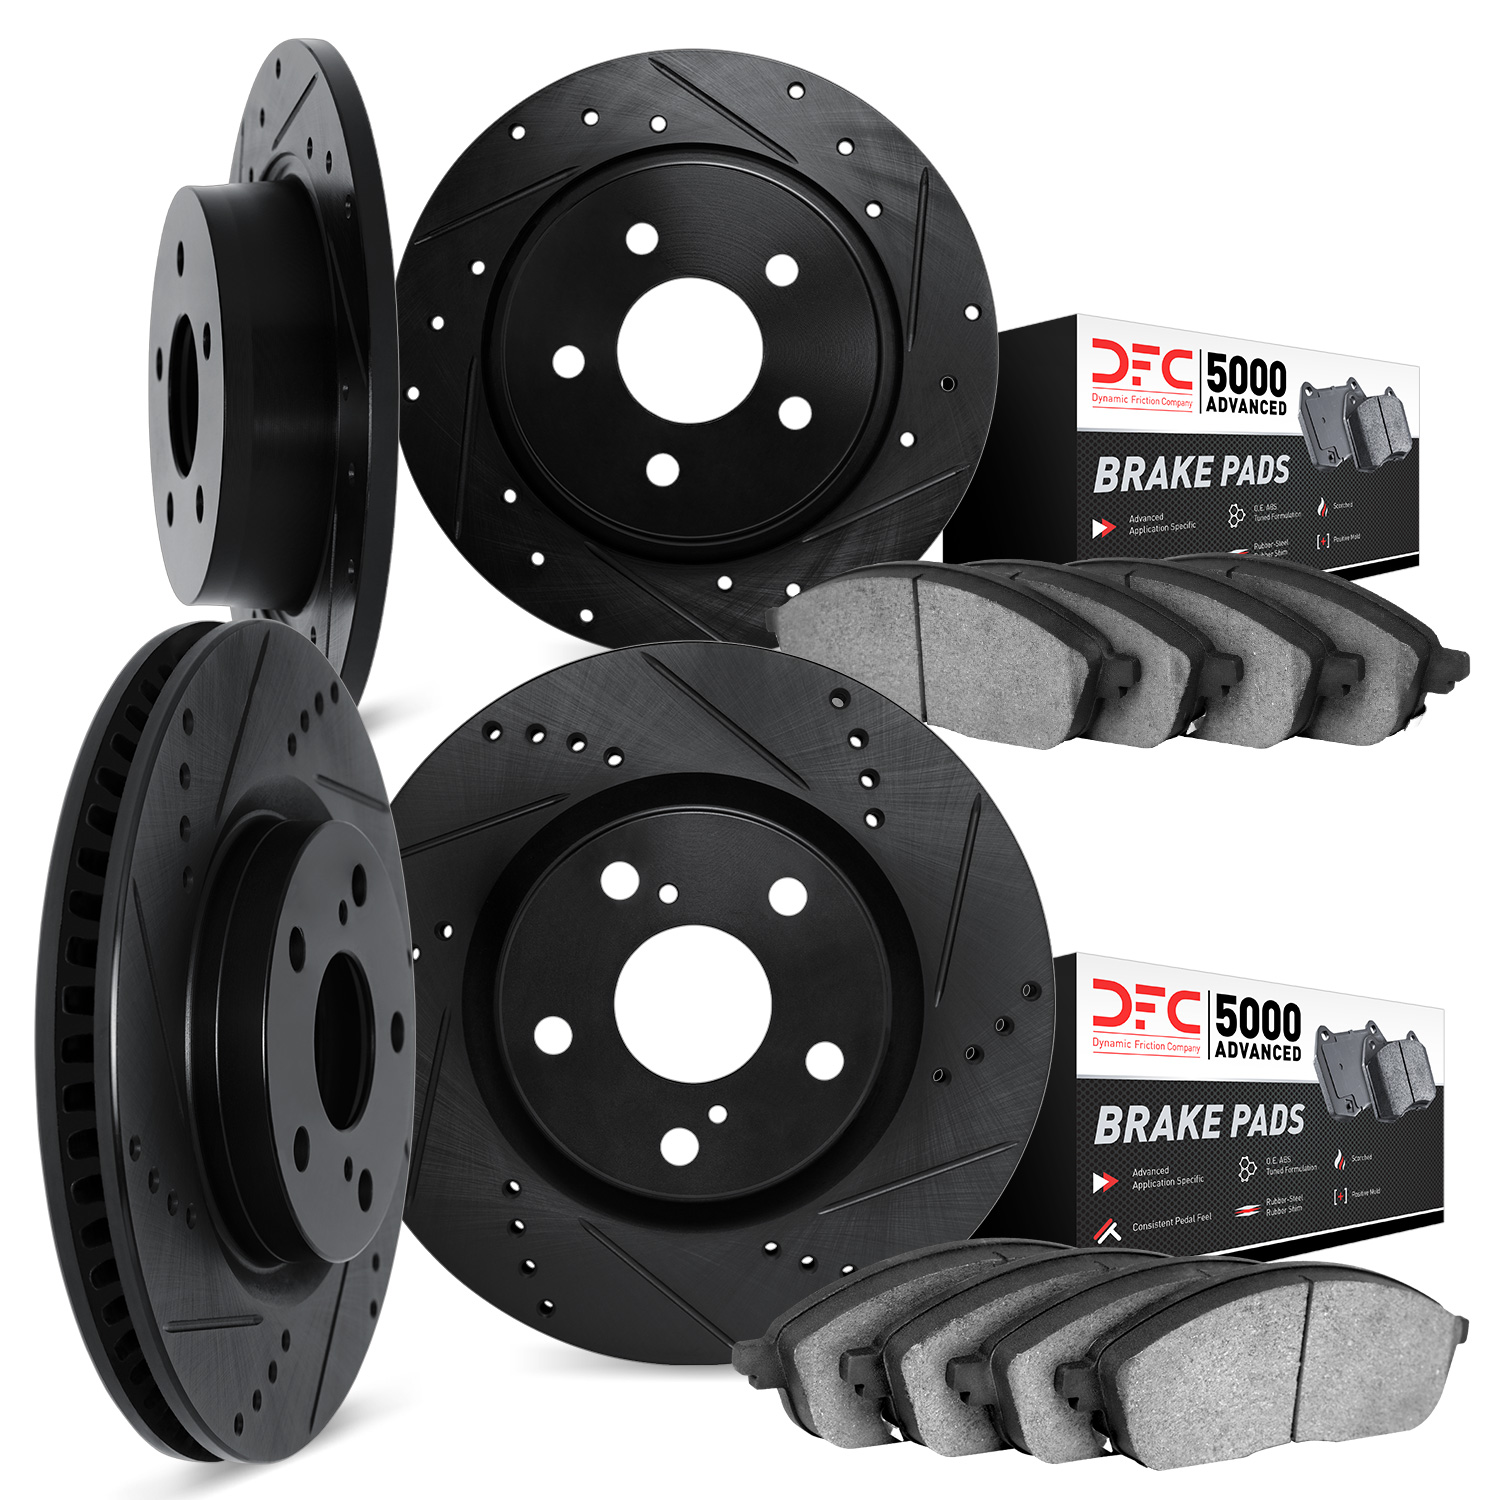 8504-67097 Drilled/Slotted Brake Rotors w/5000 Advanced Brake Pads Kit [Black], 2004-2005 Infiniti/Nissan, Position: Front and R